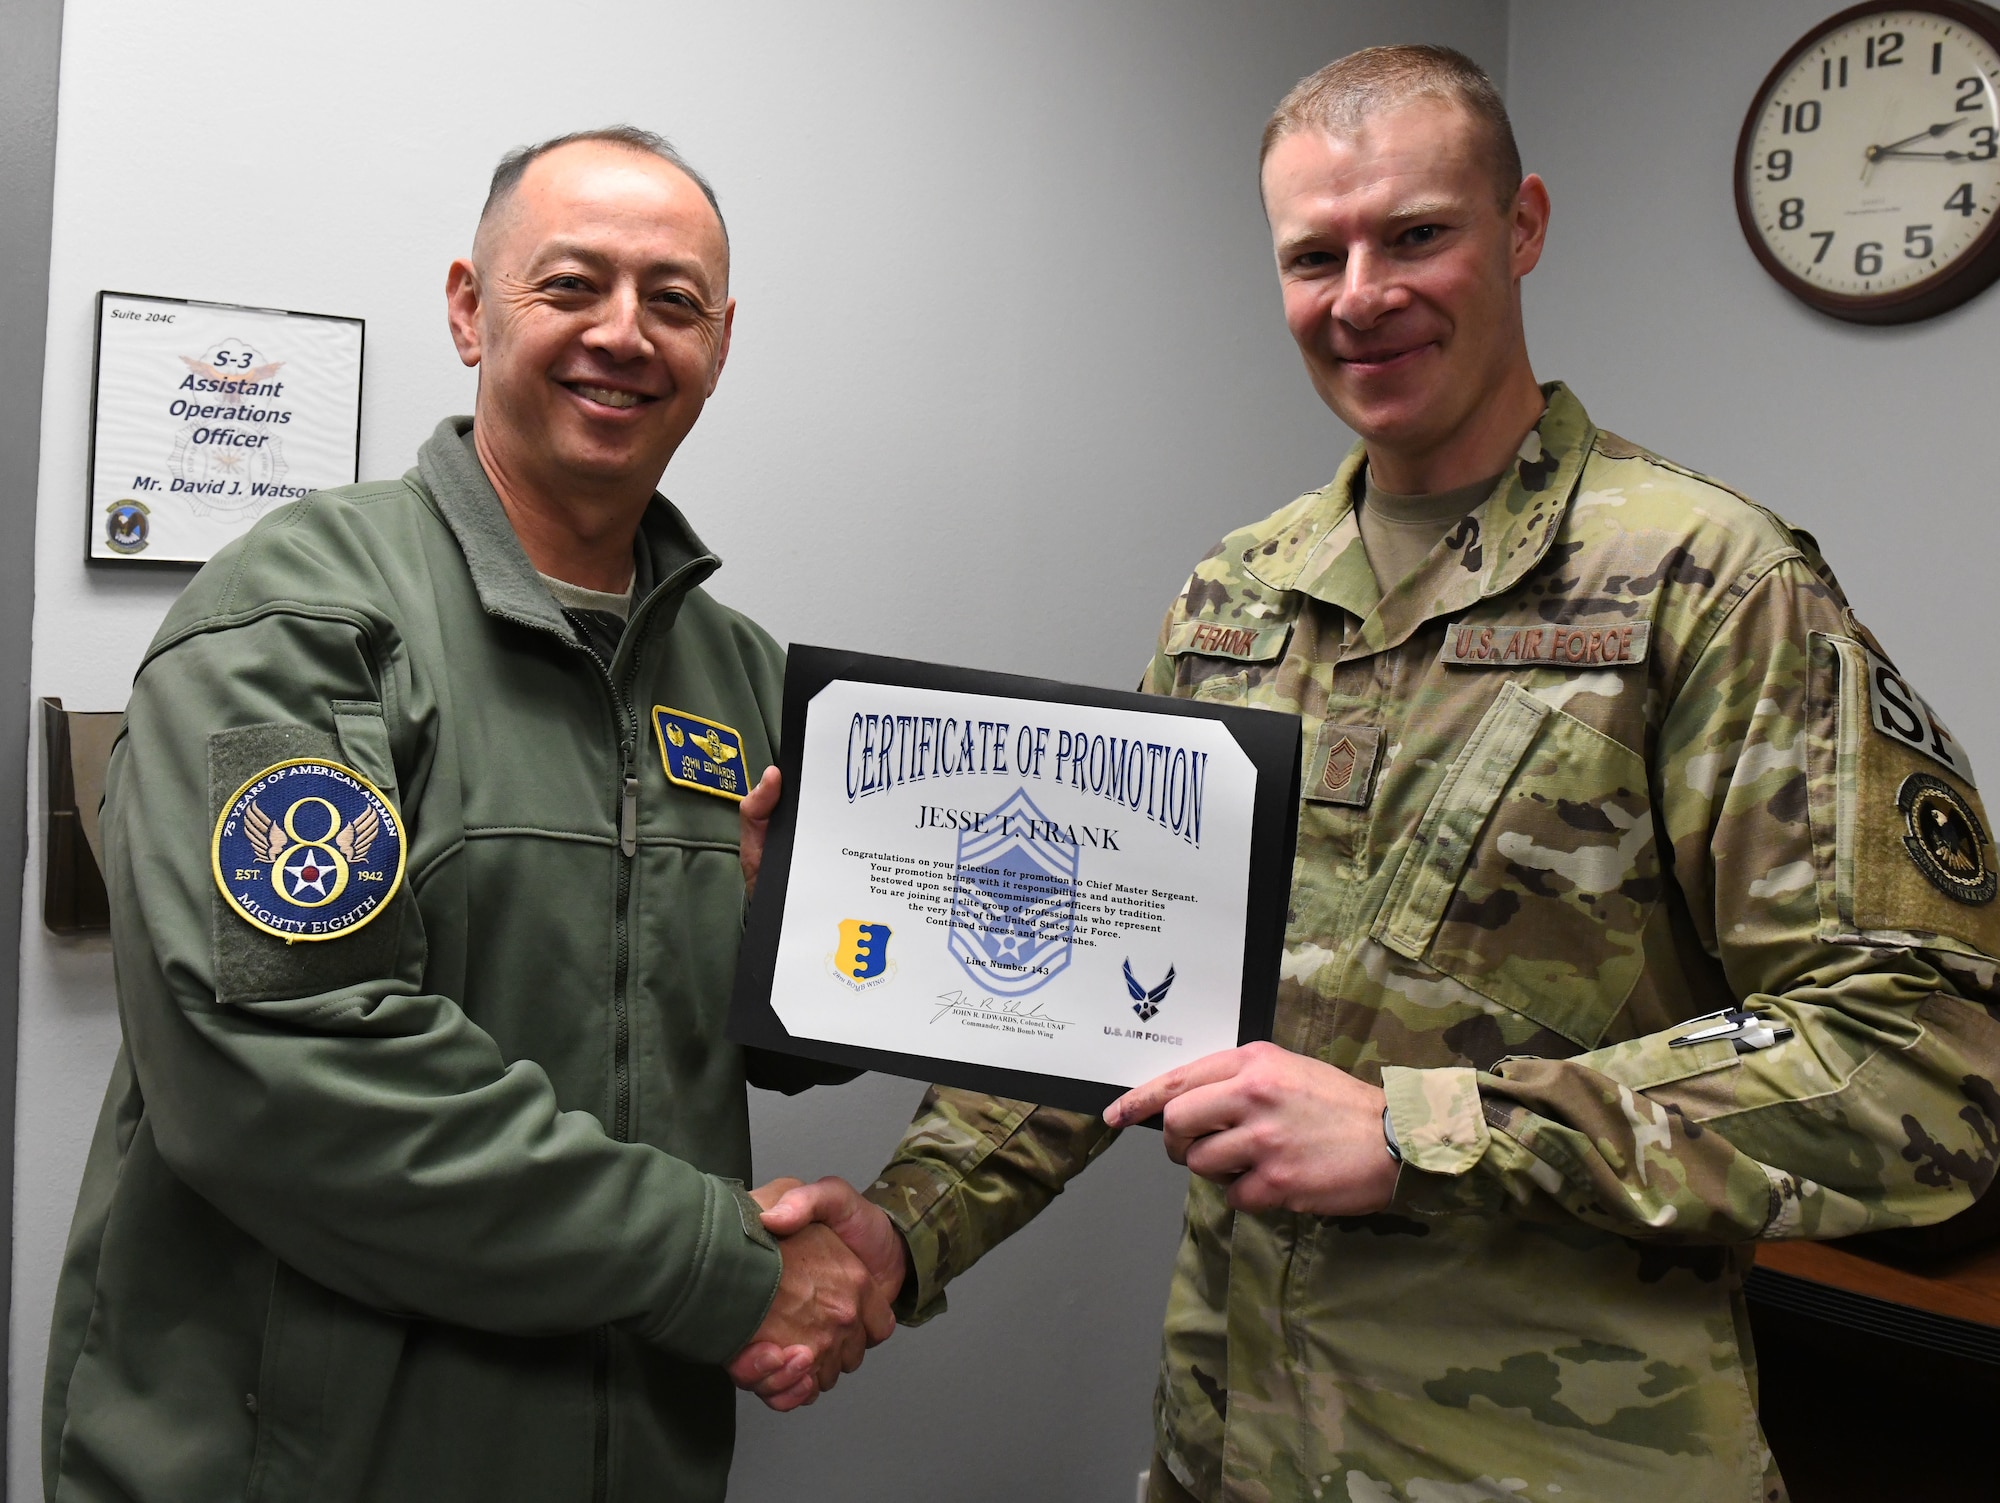 Col. John Edwards, the 28th Bomb Wing commander, presents a certificate of promotion to Senior Master Sgt. Jesse Frank, the 28th Security Forces Squadron operations superintendent, at Ellsworth Air Force Base, S.D., Dec. 4, 2018. Frank was selected for the rank of chief master sergeant during promtion cycle 18E9. Out of the elegable 2,241 sergeants across the Air Force that were eligible for the rank, only 479 were selected. (U.S. Air Force photo by Airman 1st Class Thomas Karol)